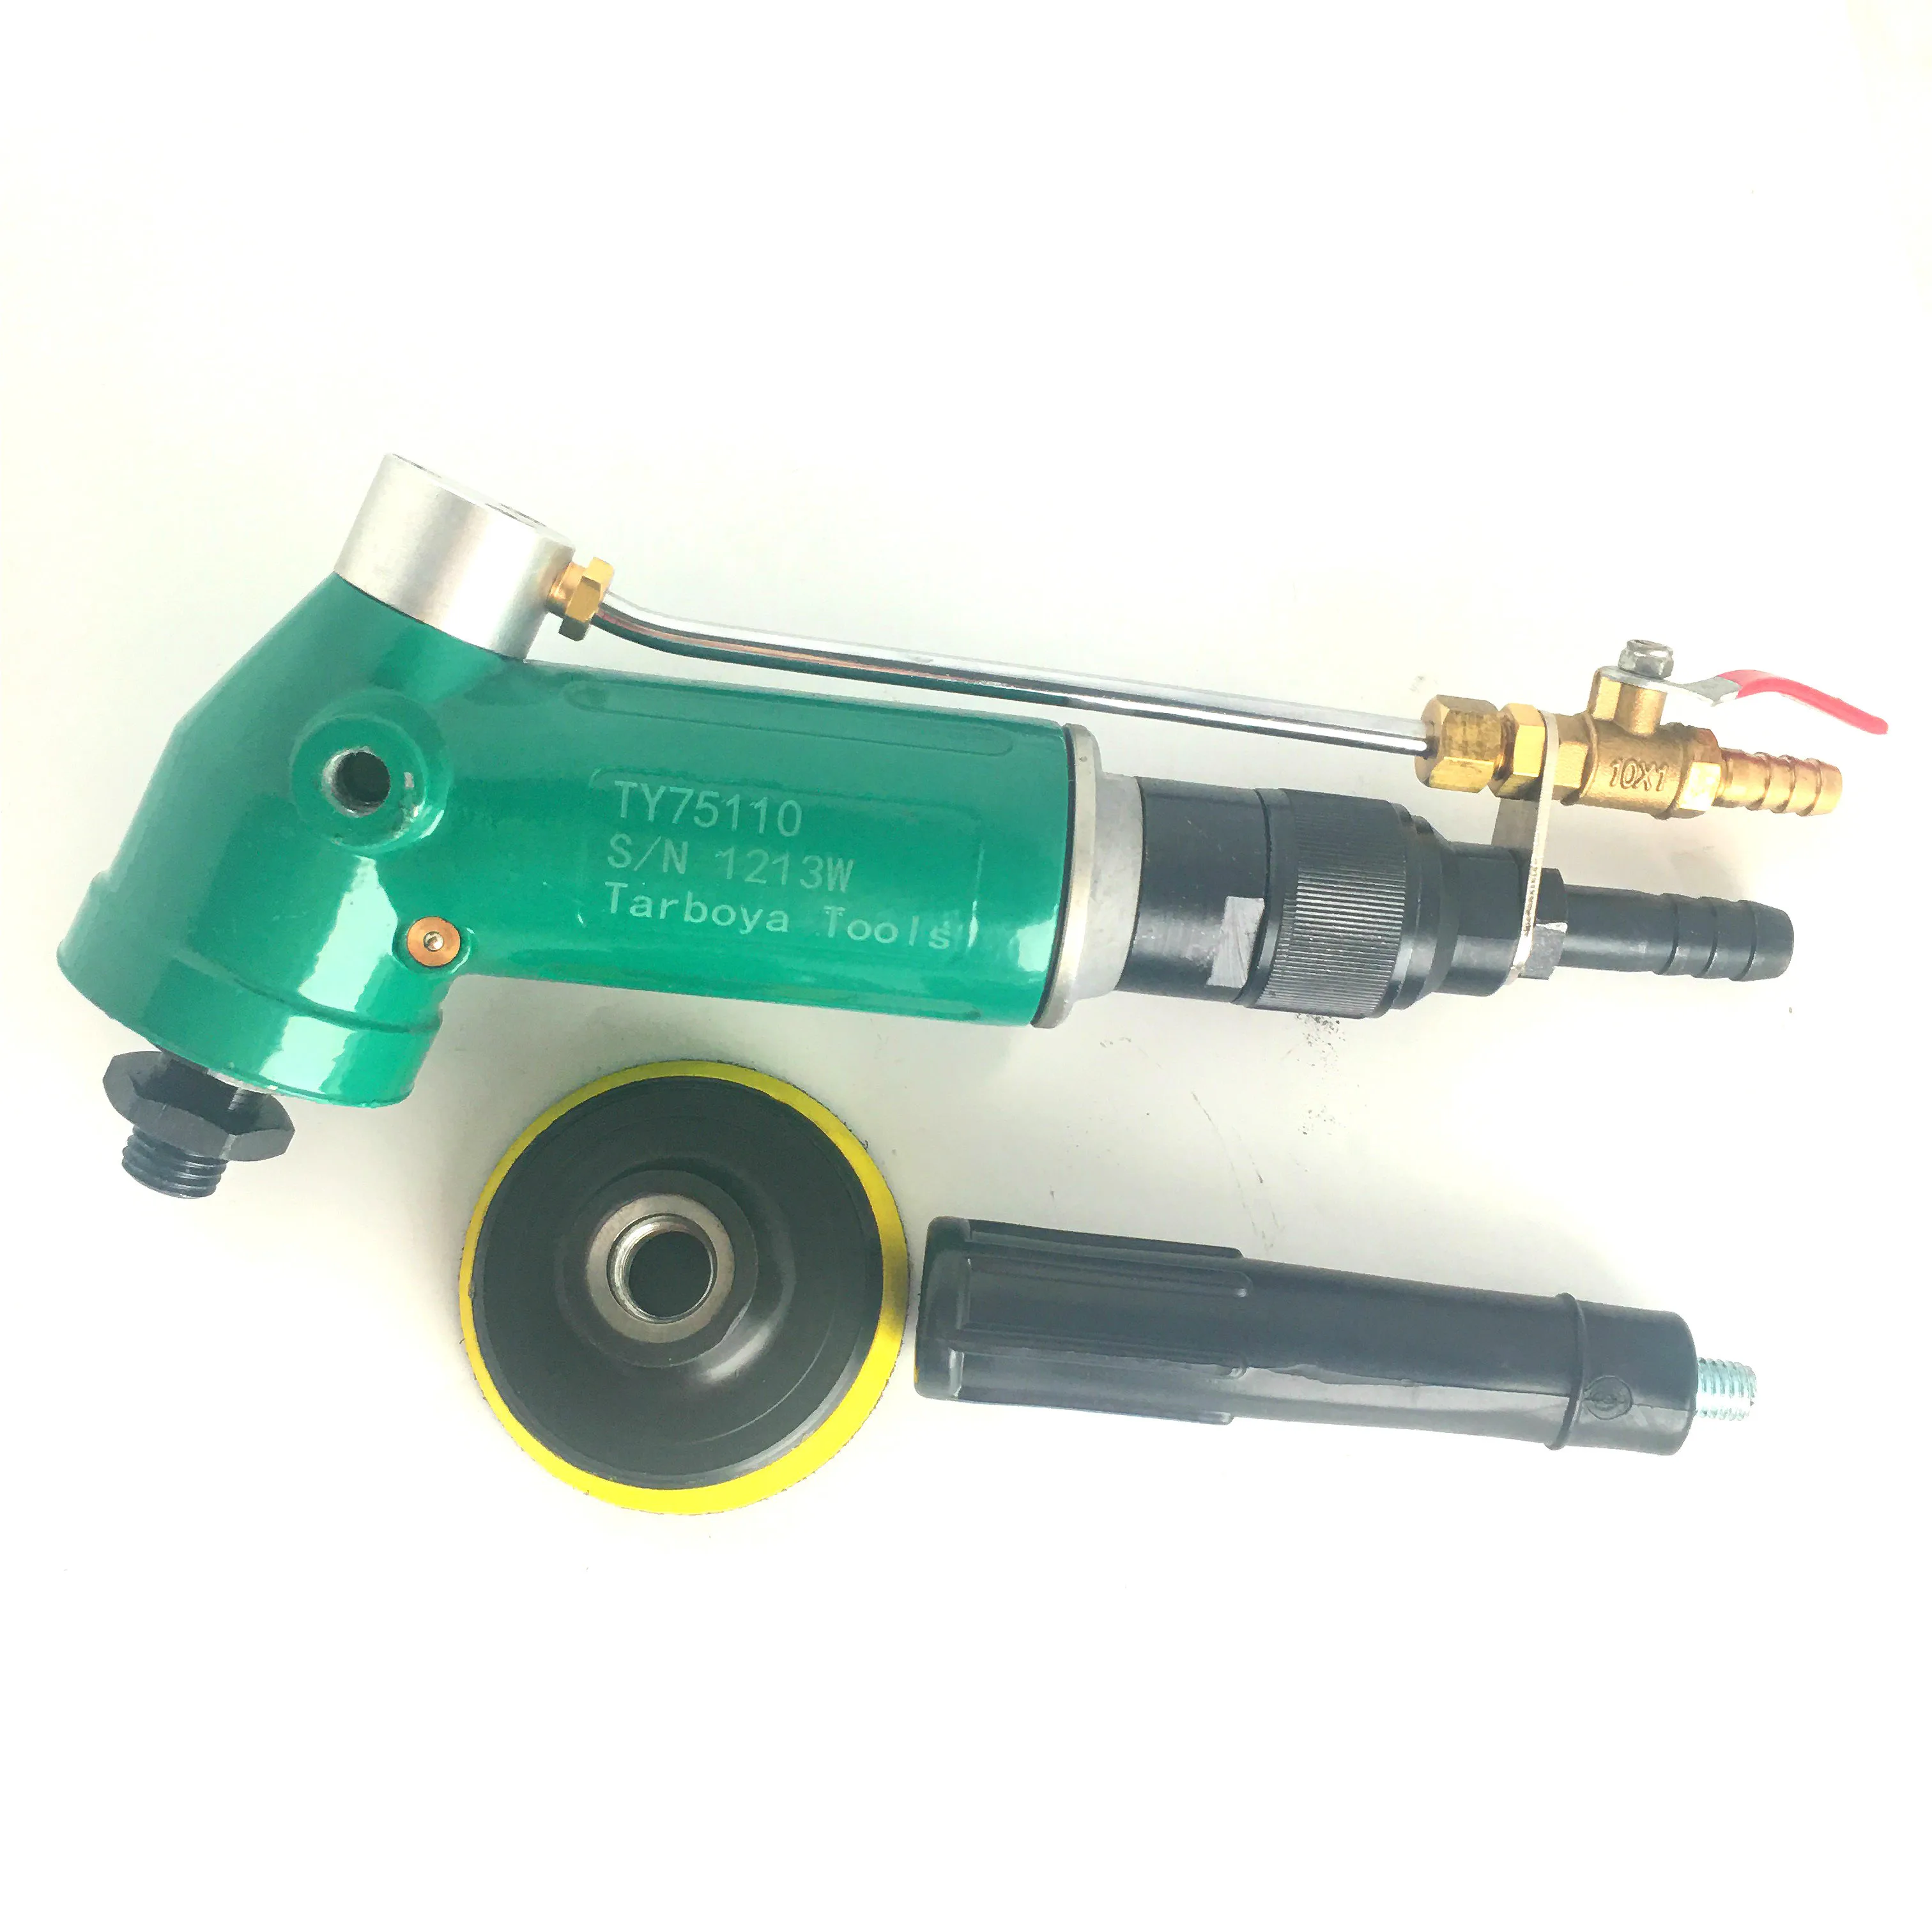 

Reliable and affordable wet air polisher widely used in stone fabrication industry. Light weight high quality